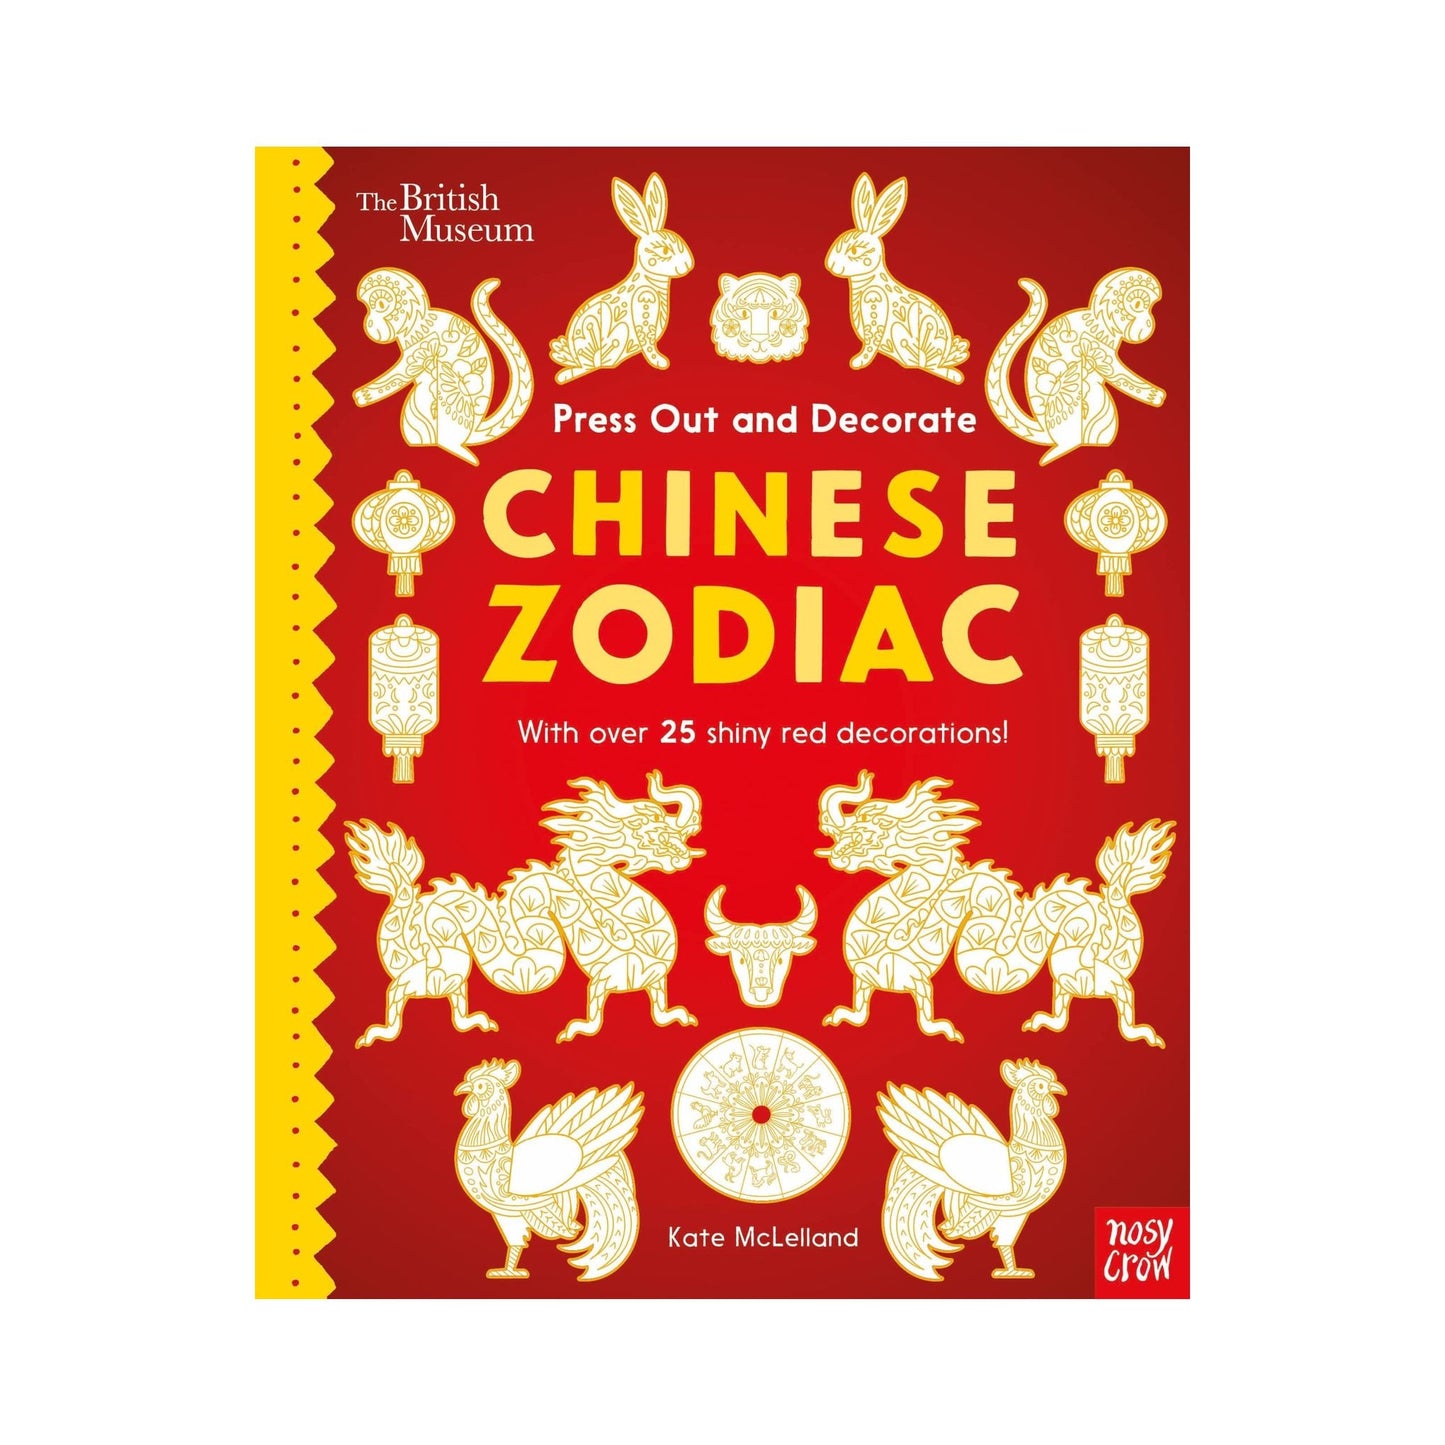 Press out and Decorate Chinese Zodiac